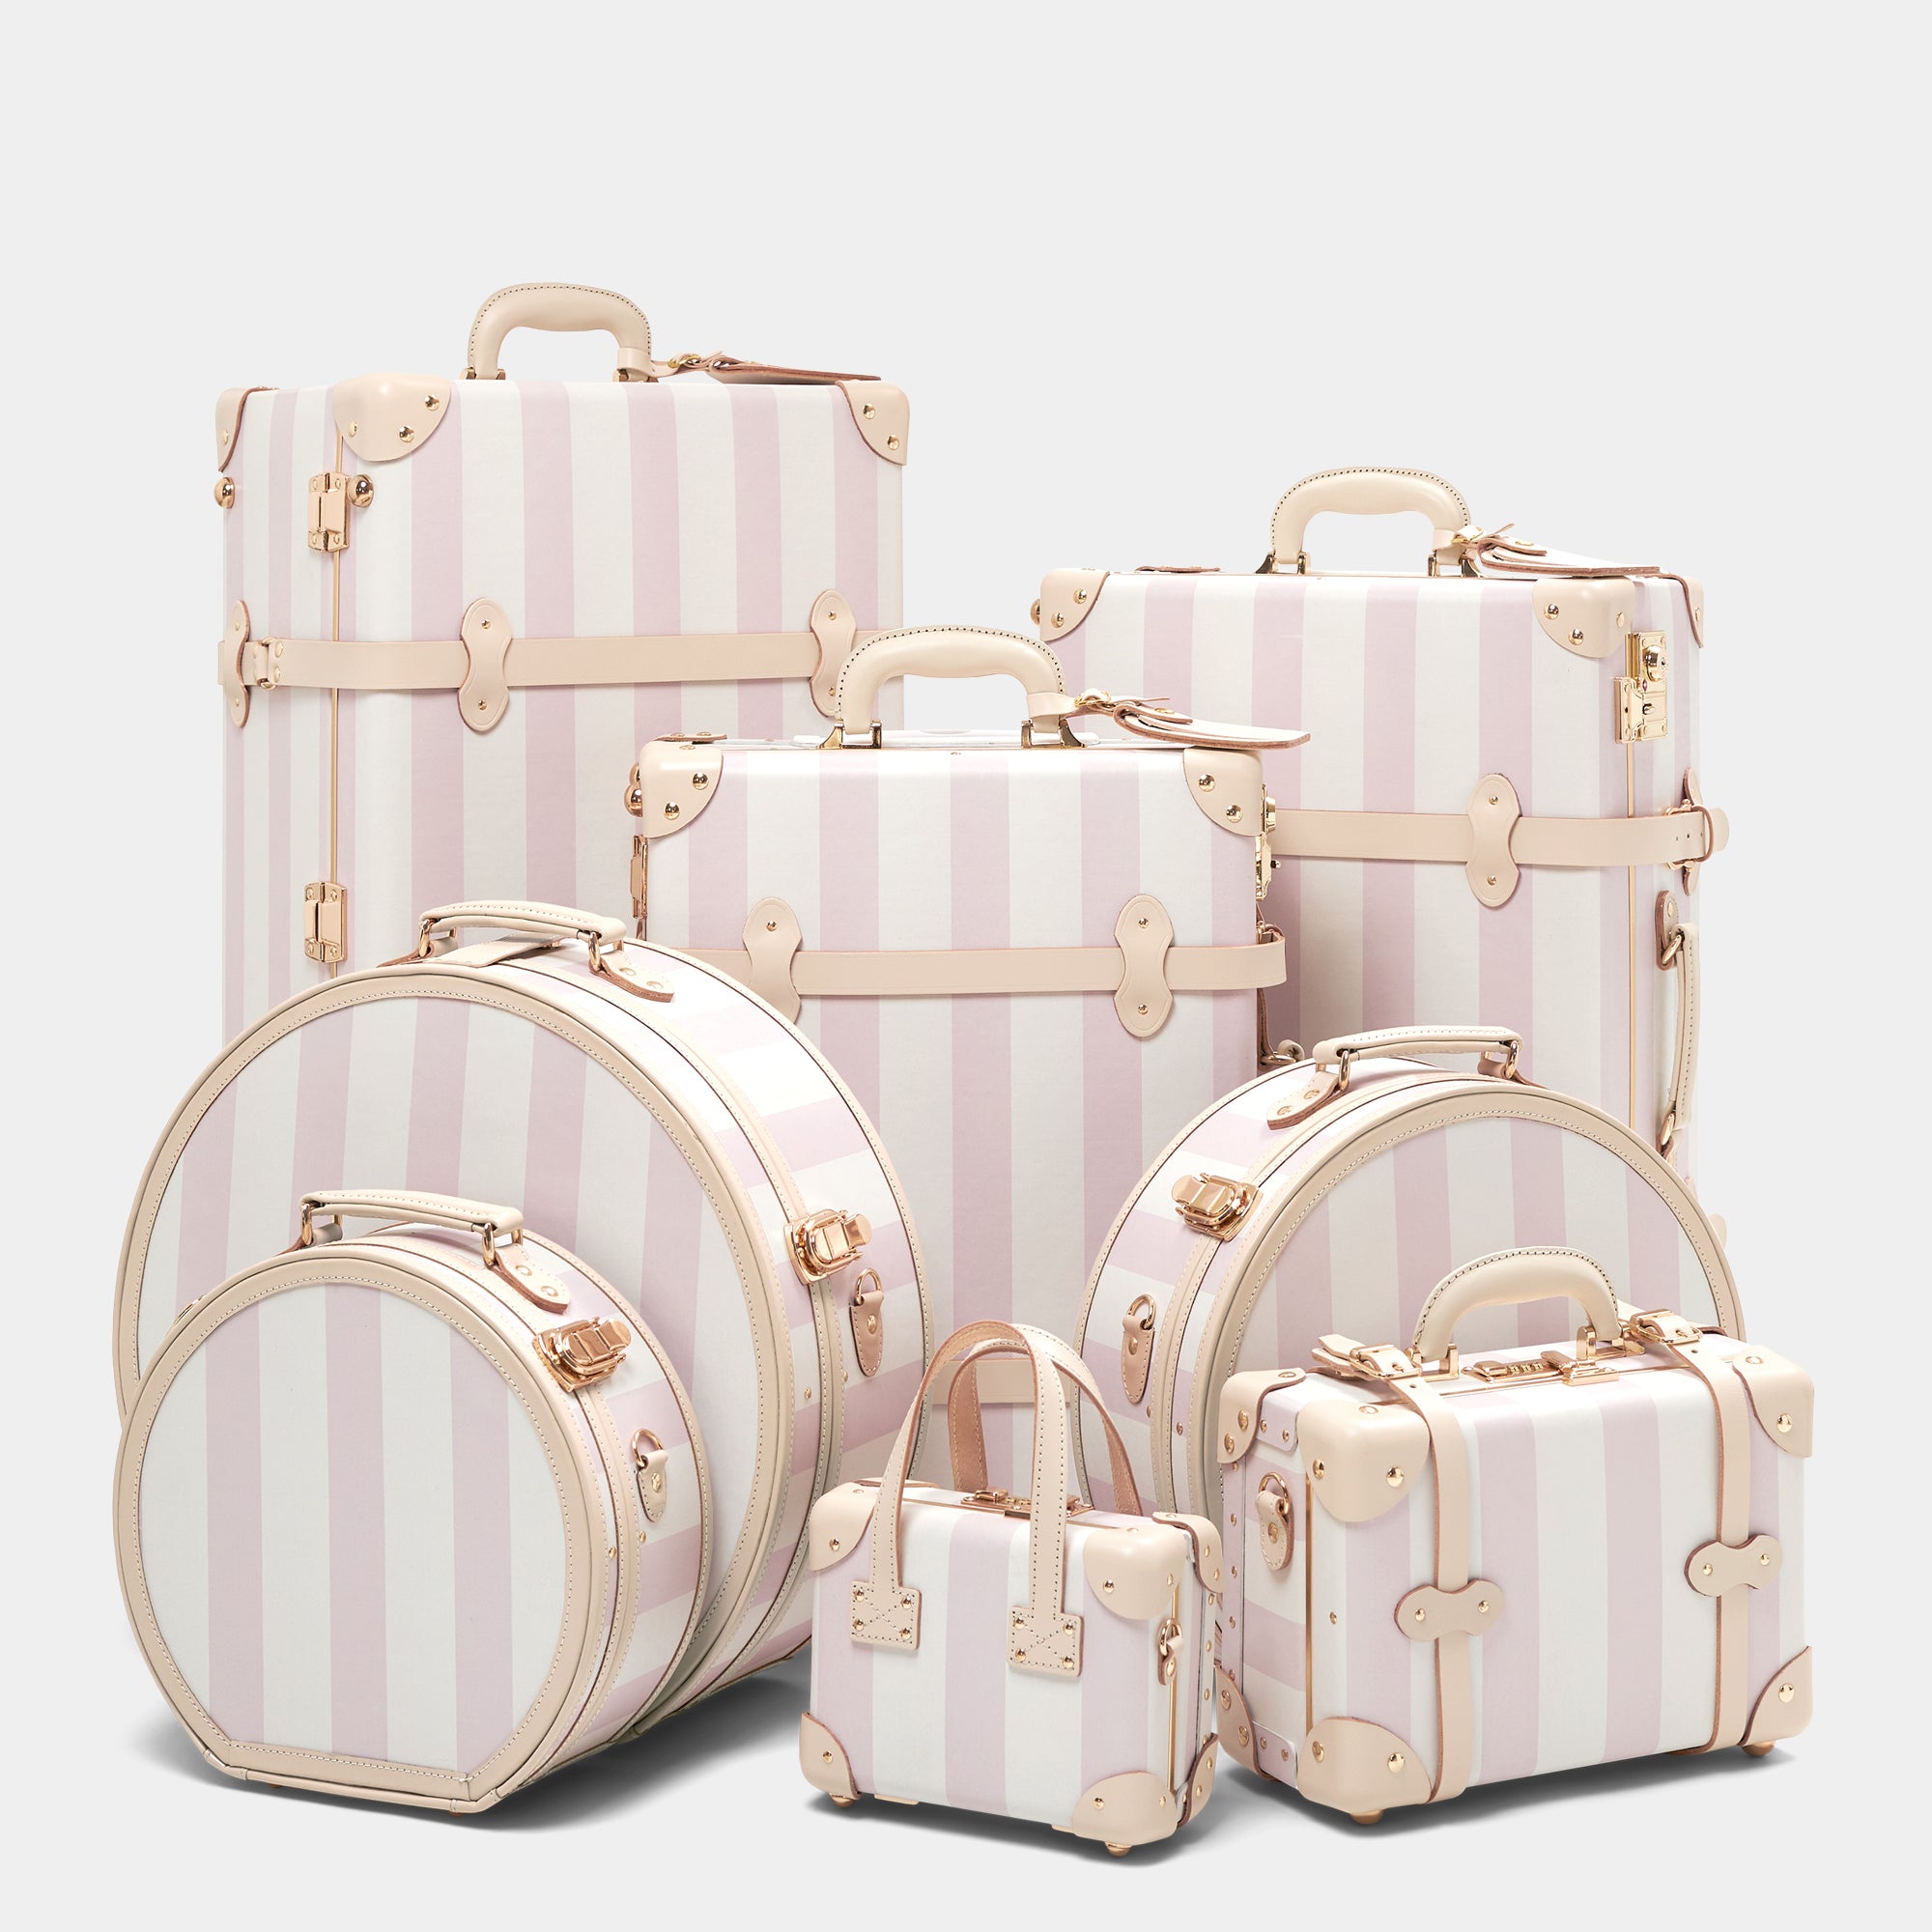 Buy Personalized Vintage Style Suitcase for Women Luggage Set